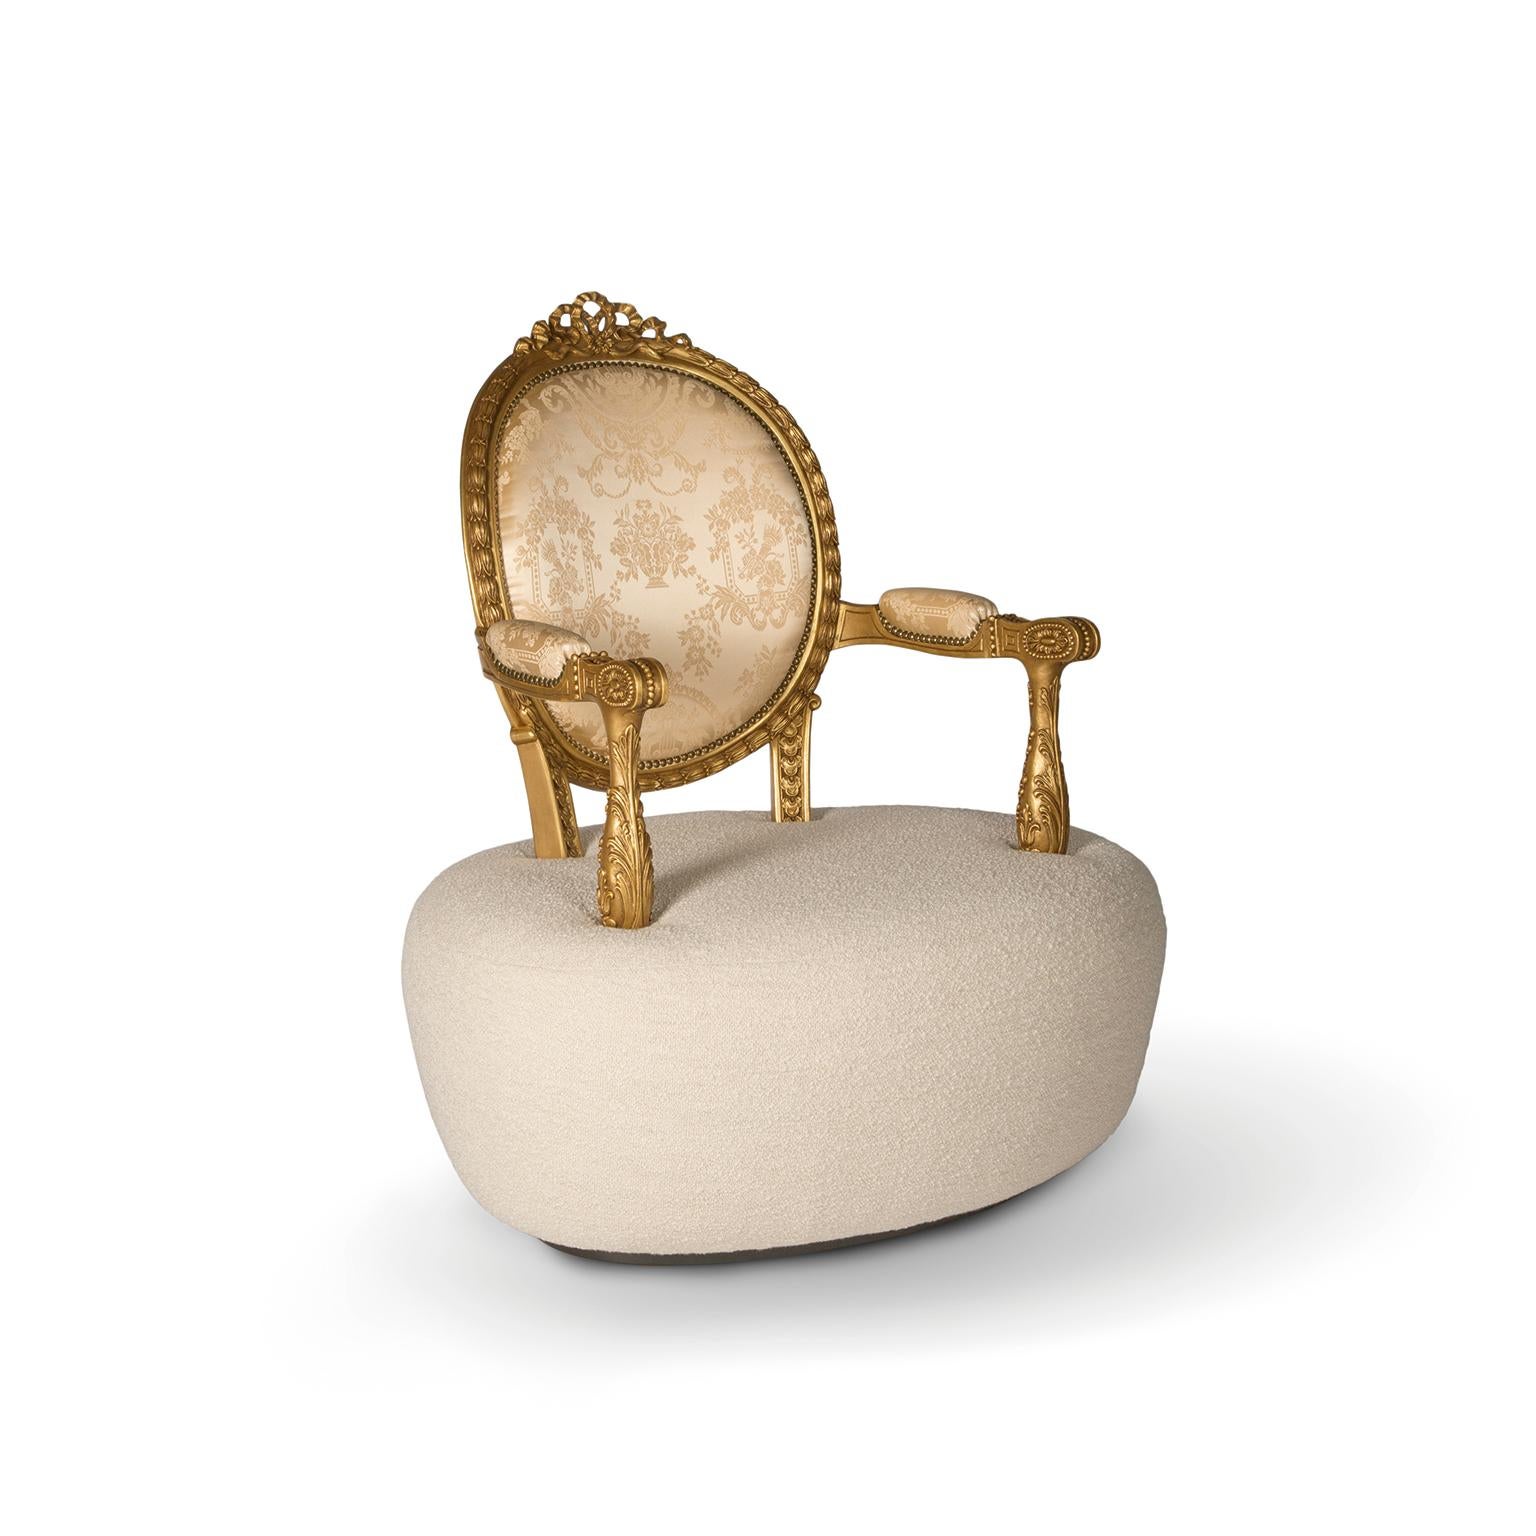 Inspiration:
This is one of the most premium armchairs of Bessa´s collection. Worthy of the grandeur of an empire, it is made with the most premium fabrics on the market, admirably hand-carved and finished in patinated 22k gold leaf. 
Its unique and